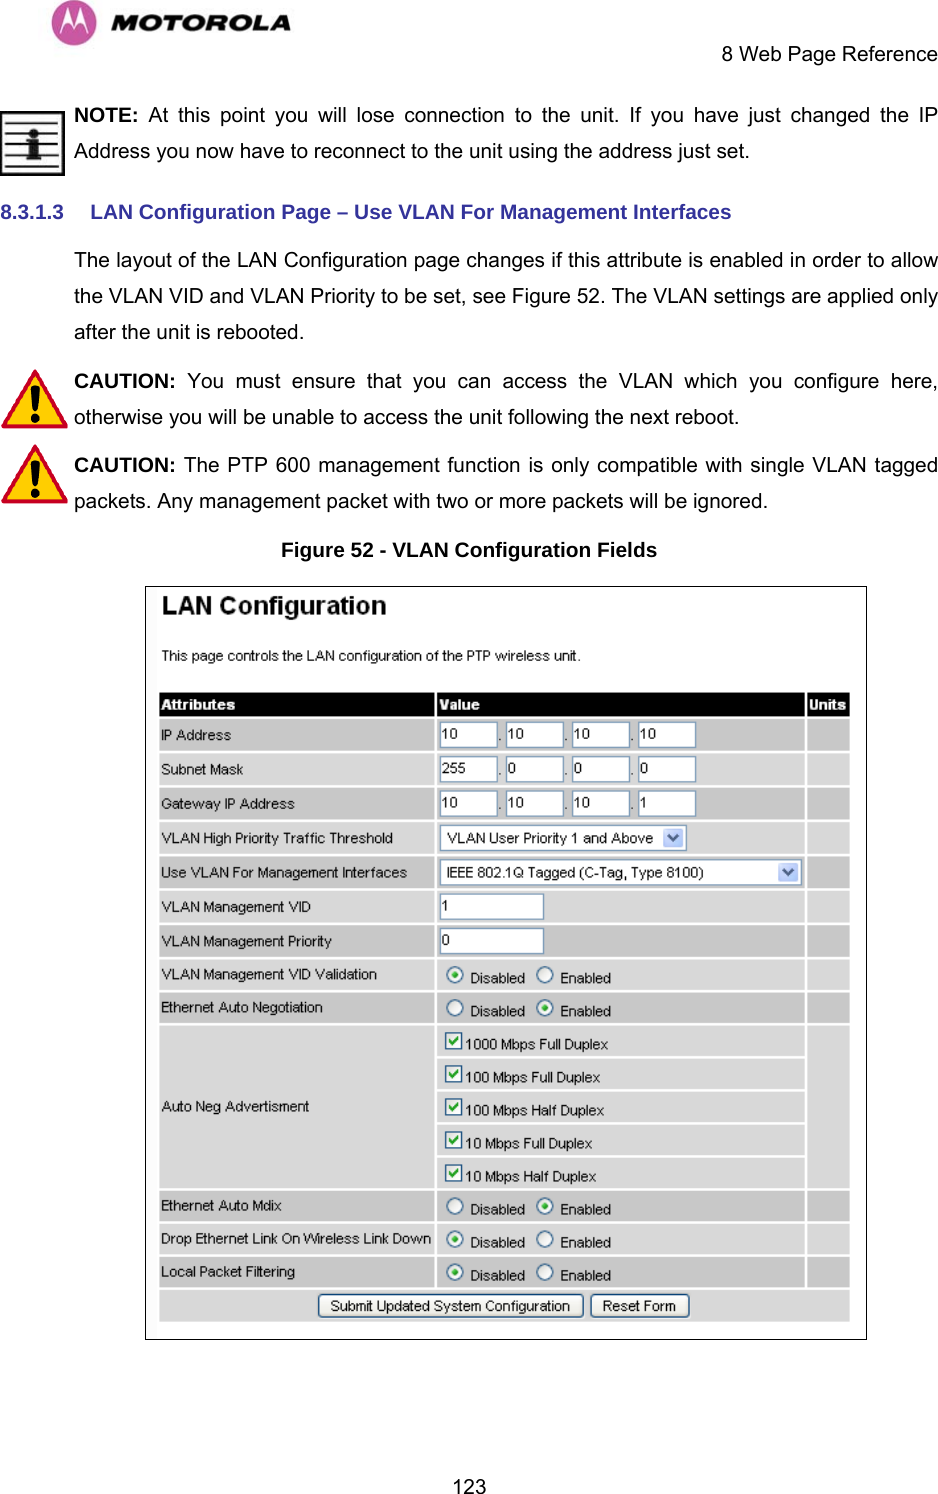     8 Web Page Reference  123NOTE: At this point you will lose connection to the unit. If you have just changed the IP Address you now have to reconnect to the unit using the address just set. 8.3.1.3  LAN Configuration Page – Use VLAN For Management Interfaces The layout of the LAN Configuration page changes if this attribute is enabled in order to allow the VLAN VID and VLAN Priority to be set, see Figure 52. The VLAN settings are applied only after the unit is rebooted. CAUTION:  You must ensure that you can access the VLAN which you configure here, otherwise you will be unable to access the unit following the next reboot. CAUTION: The PTP 600 management function is only compatible with single VLAN tagged packets. Any management packet with two or more packets will be ignored. Figure 52 - VLAN Configuration Fields   